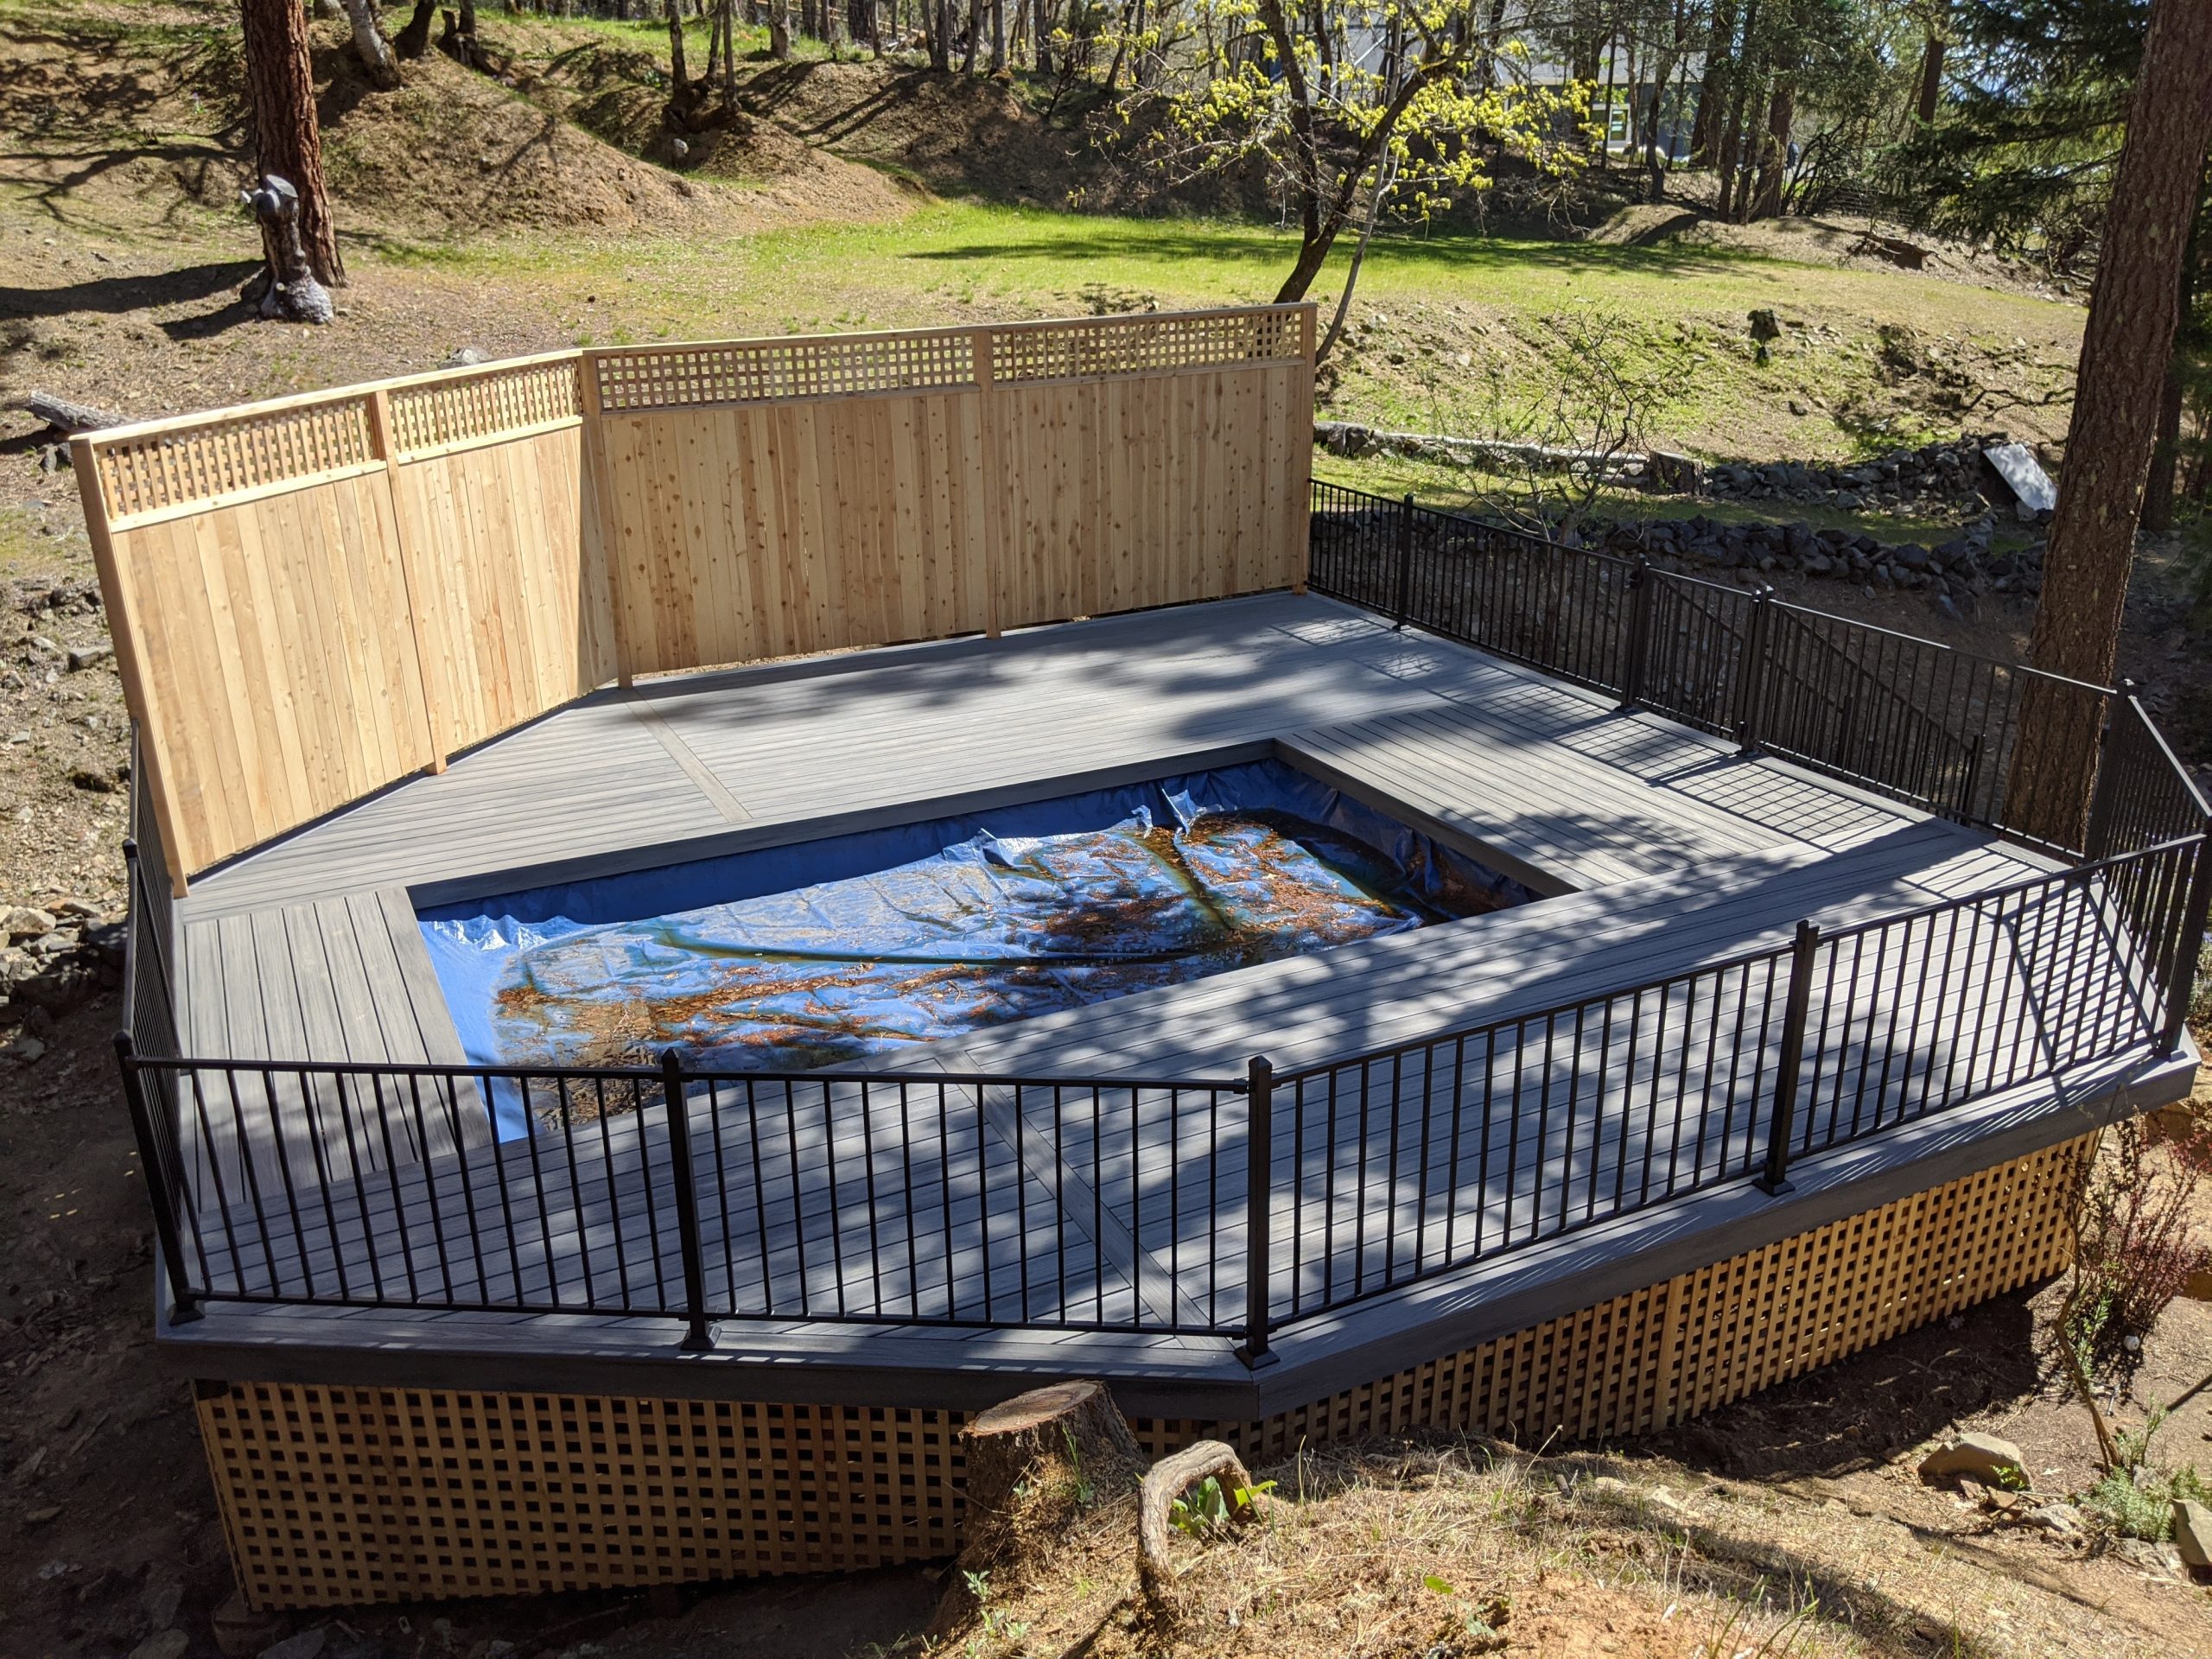 Top view of stand-alone trex deck around hot tub